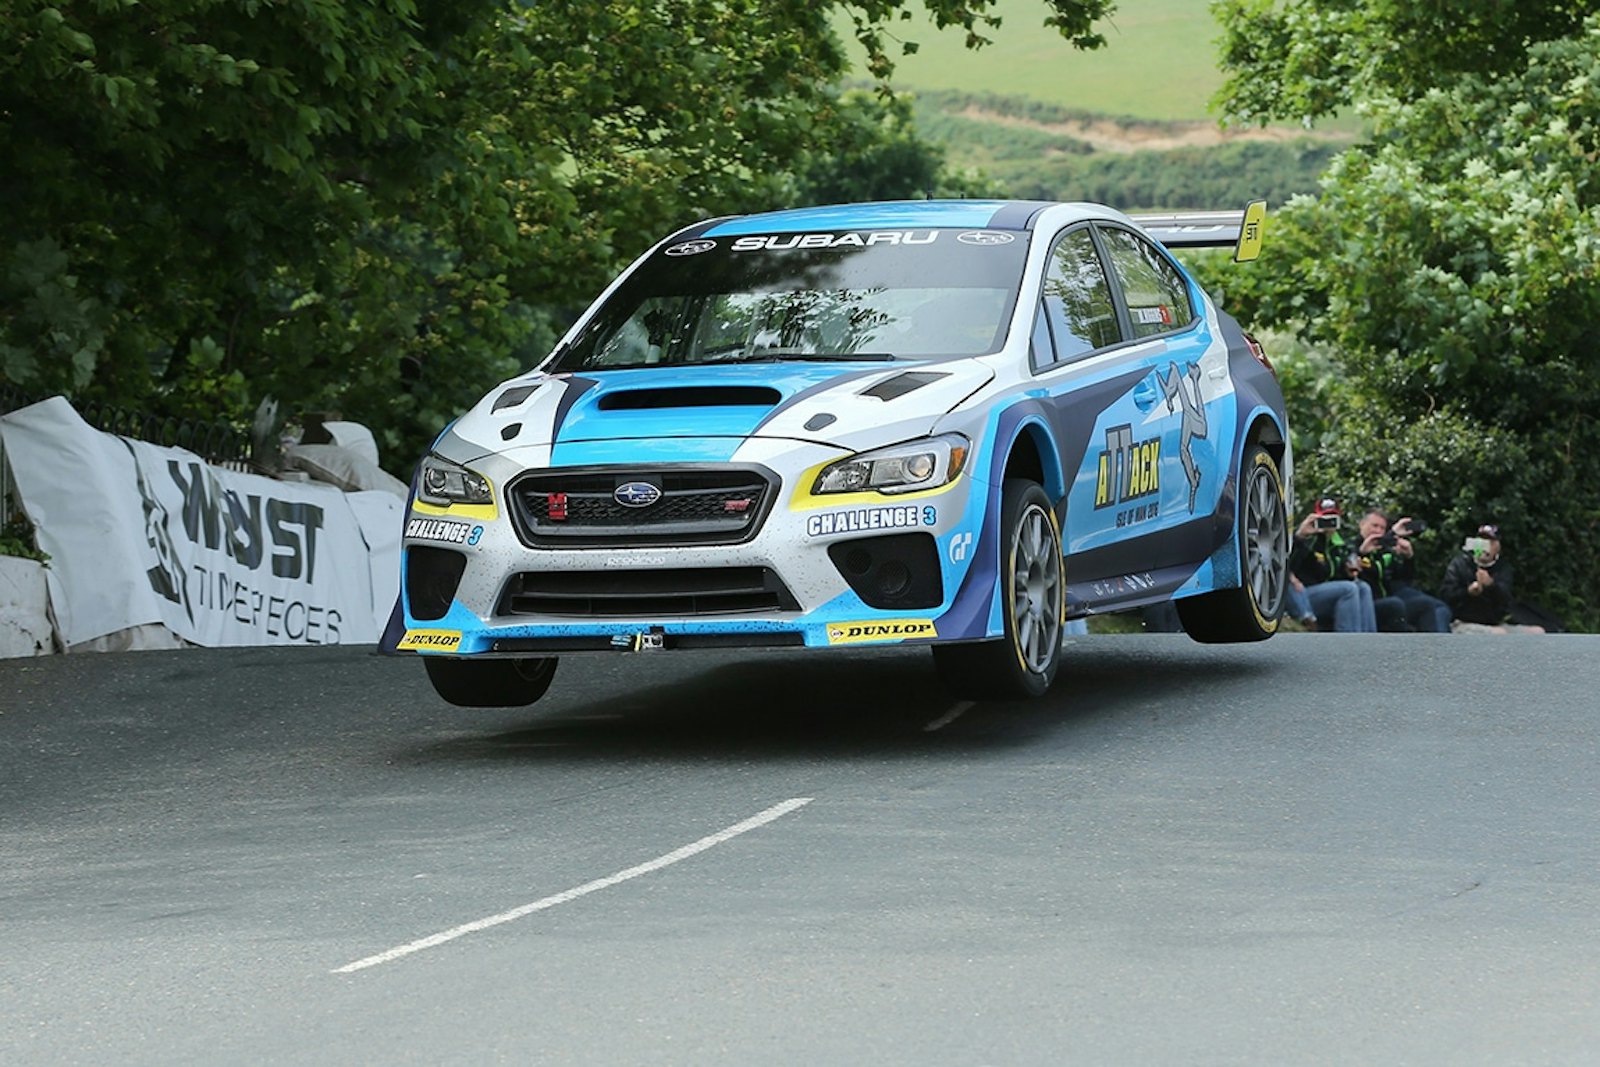 DAVE KNEEN/PACEMAKER PRESS, BELFAST: 04/06/2016: Mark Higgins in the Subaru WRX STI at Ballaugh Bridge during his record-breaking lap around the Isle of Man TT Course.